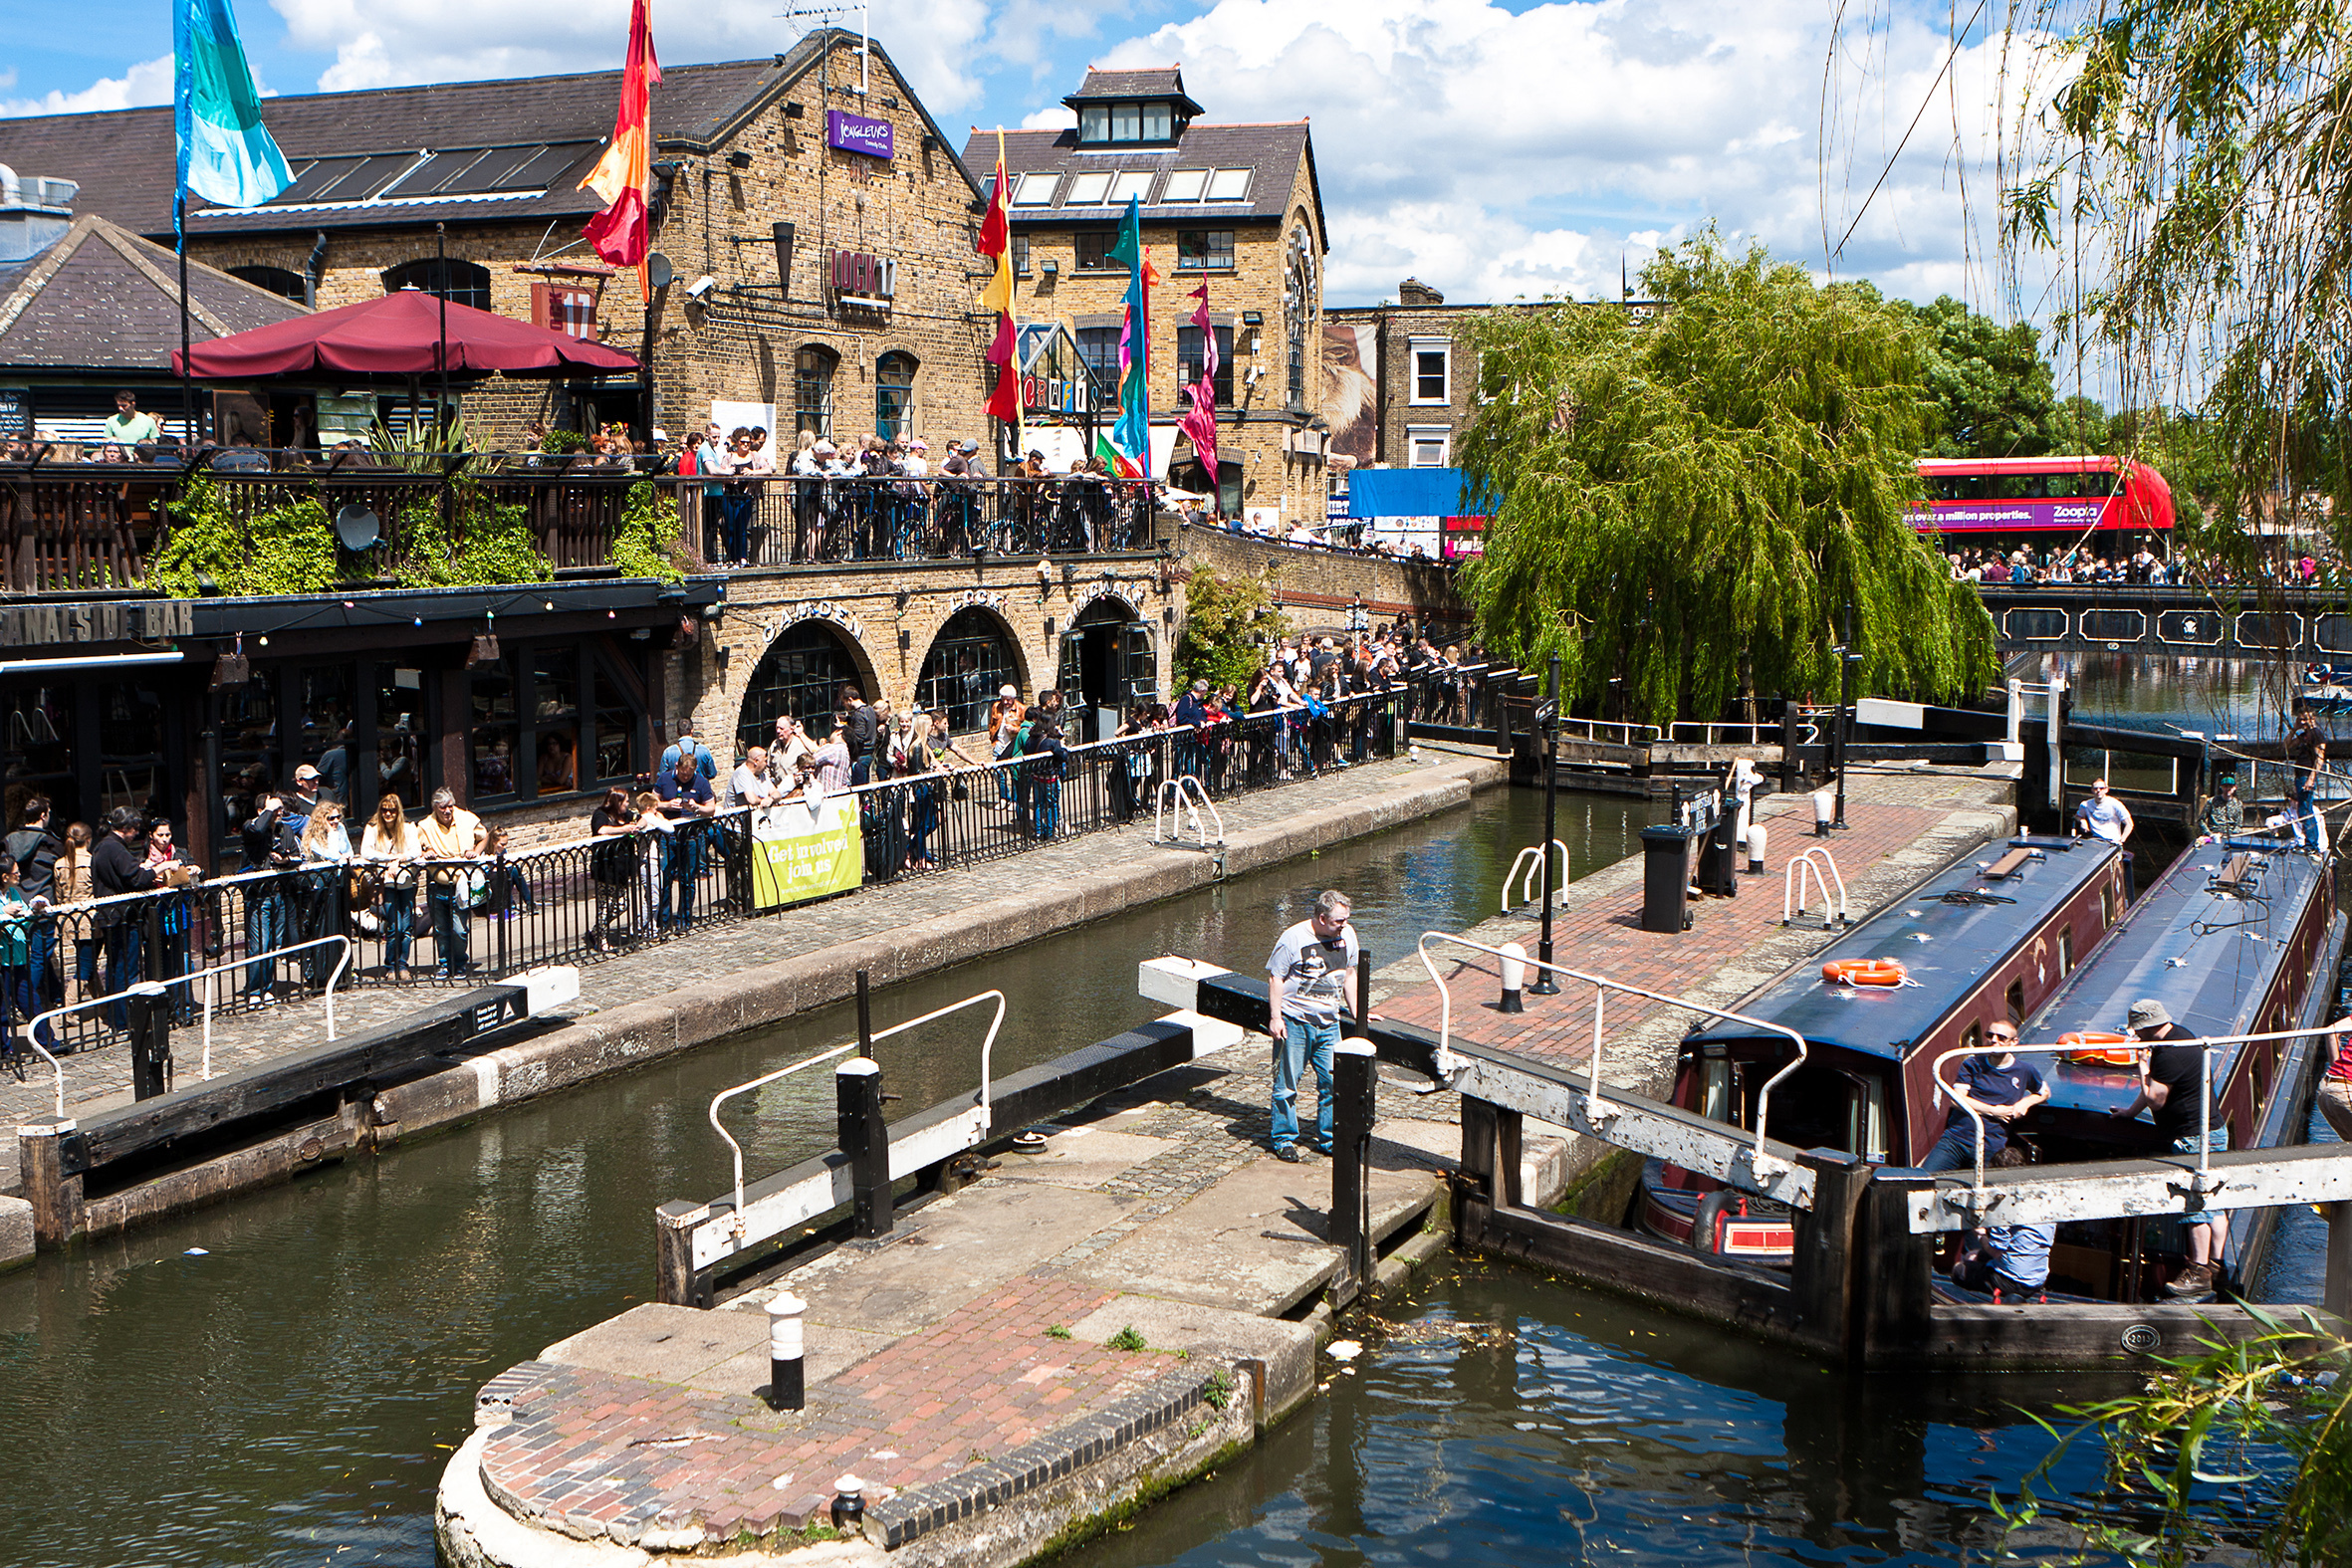 The best of Camden, picked by a clued-up local